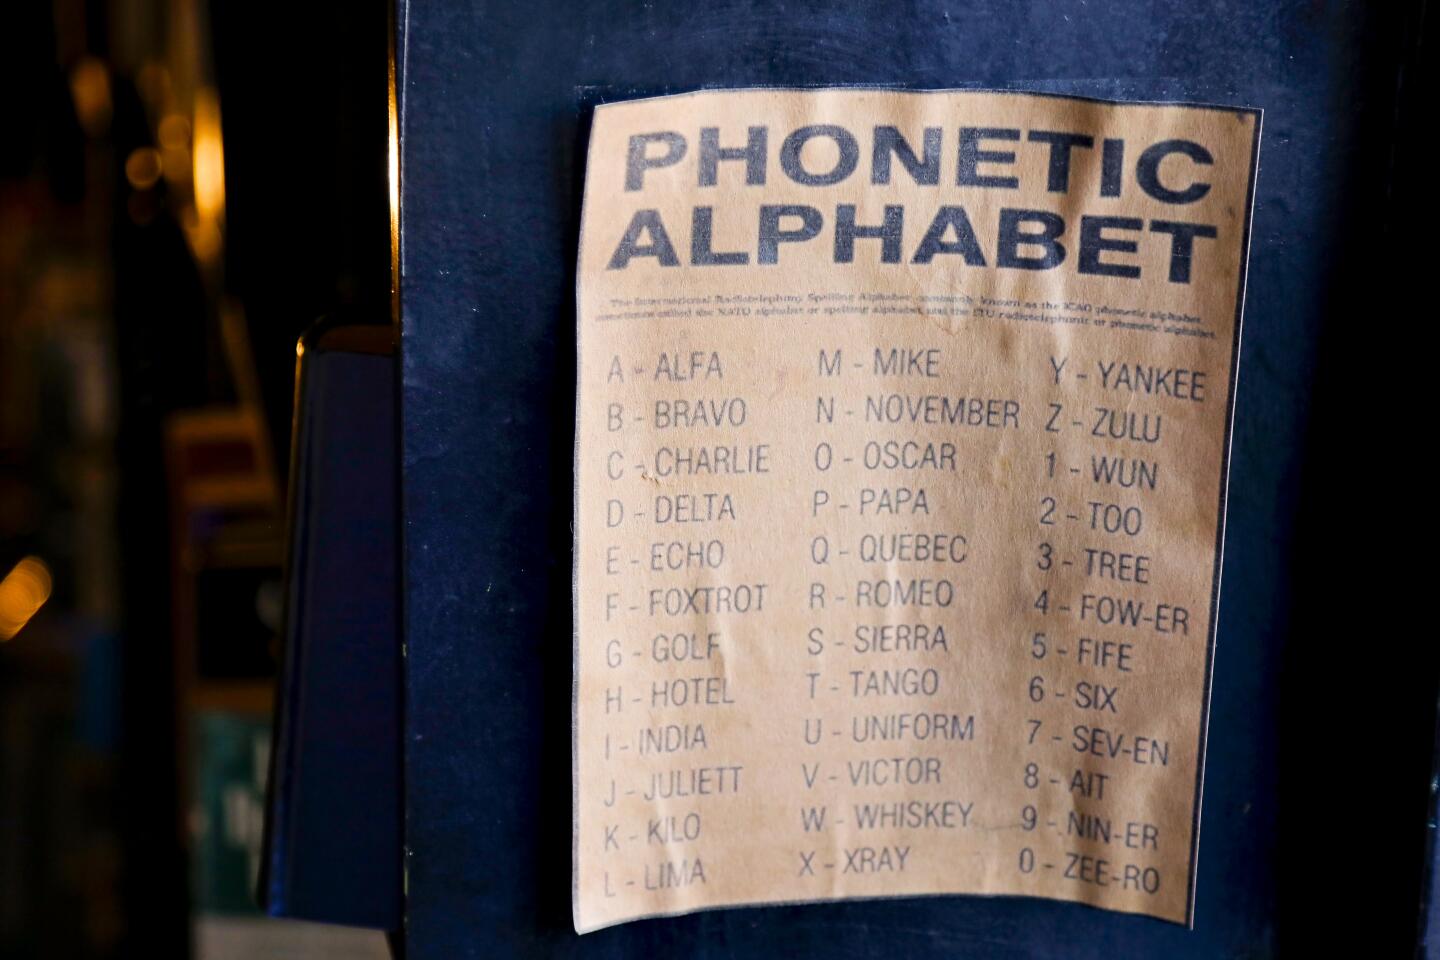 A copy of the phonetic alphabet is one of the many items at Lhooq Books, a funky vintage bookstore in Carlsbad Village. Sean Christopher, the owner recently received a 60-day eviction notice for both the shop and the adjoining house where he has raised his son, alone. He's hoping to achieve a stay of eviction on the property long enough to sell off his book inventory and find a new space without going bankrupt and ending up homeless with his son.